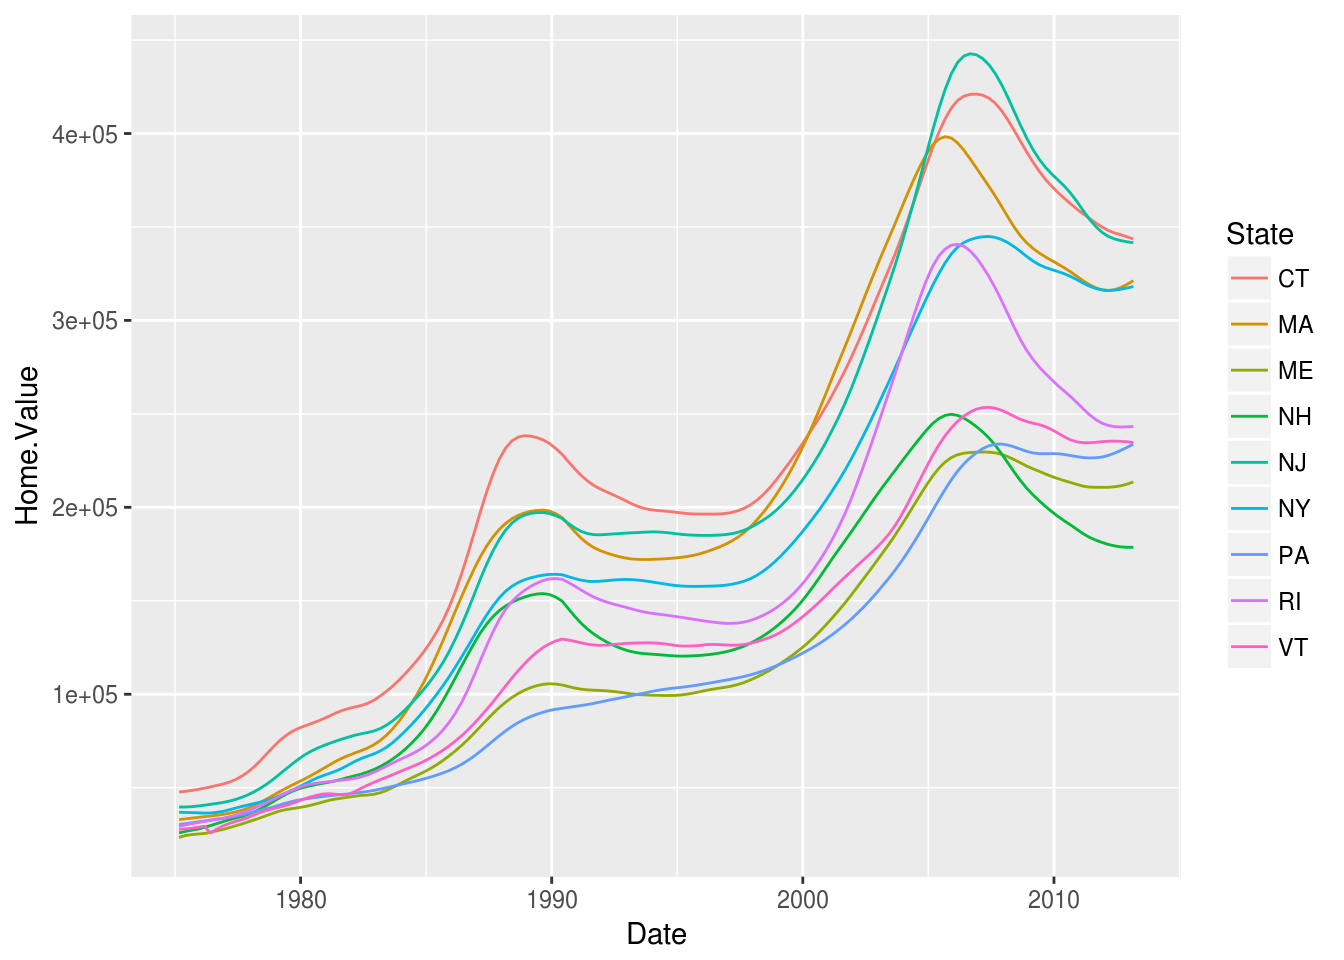 Ggplot In R Tutorial Data Visualization With A Scientist S Guide To R